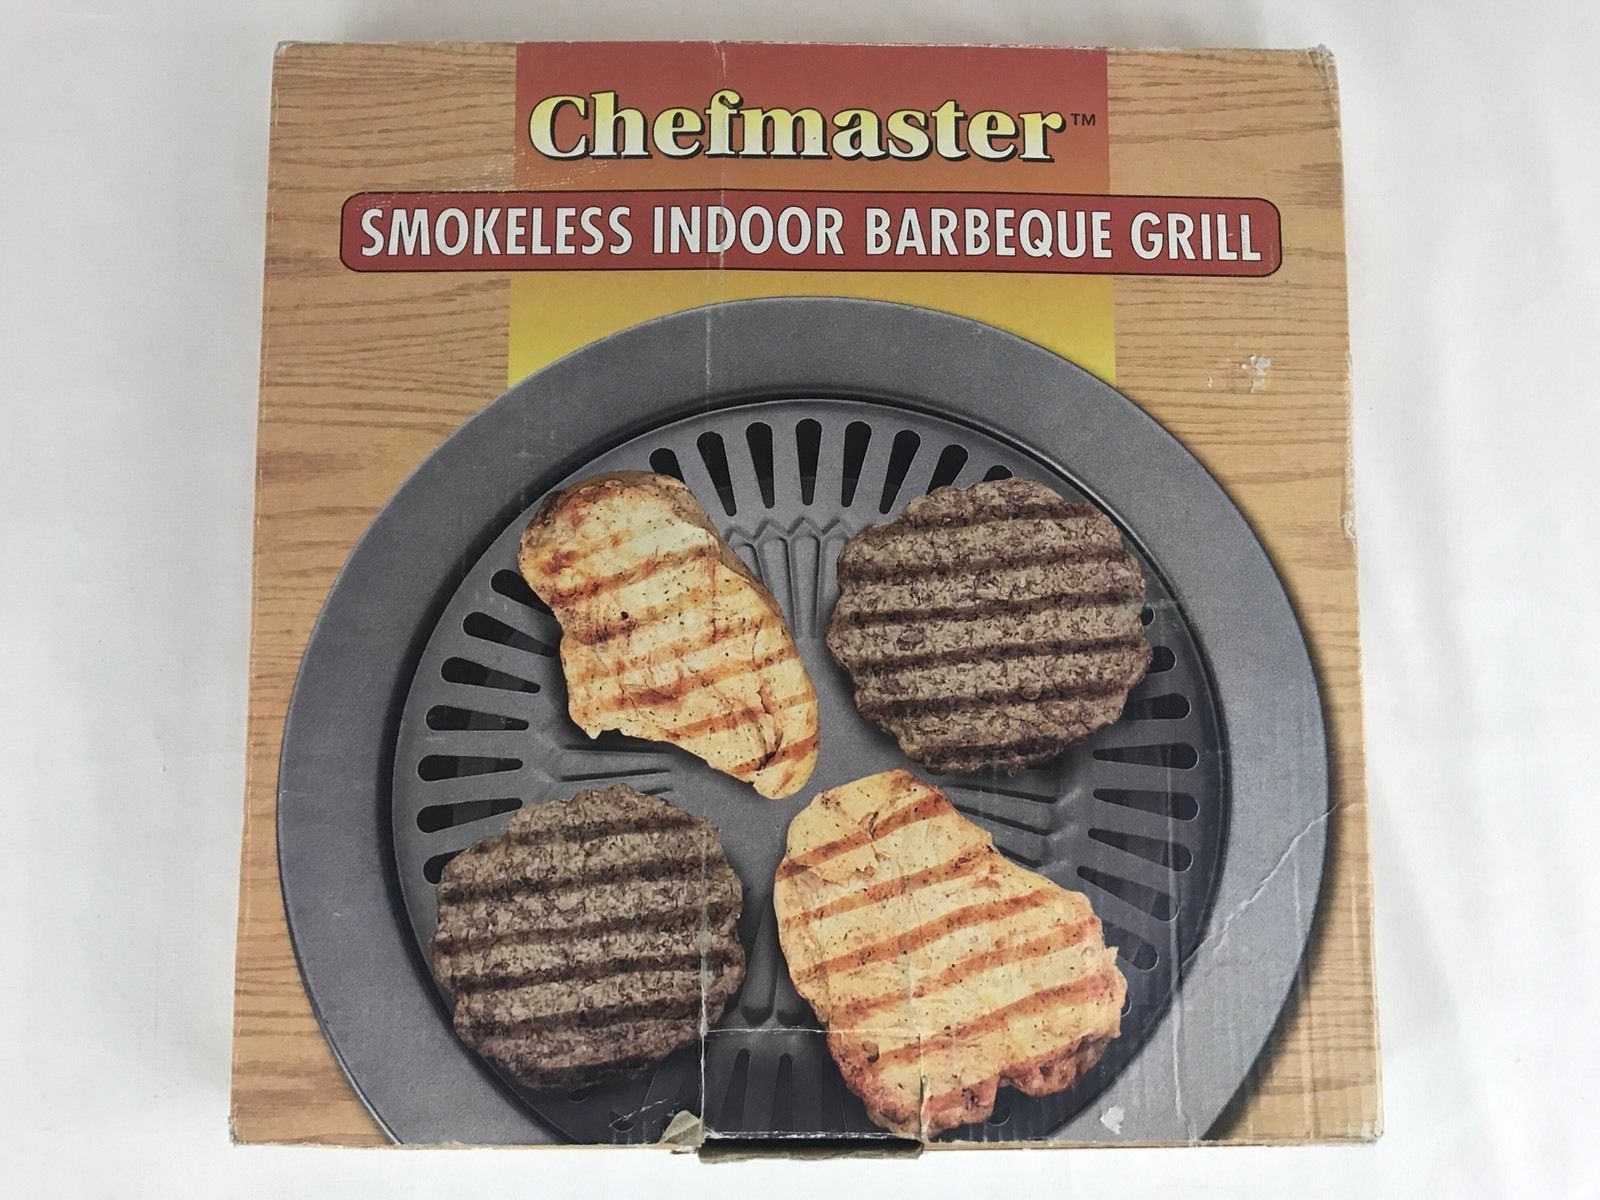 Chefmaster Smokeless Indoor Barbeque Grill KTGR5 Electric Stove Gas Stovetop - $9.95